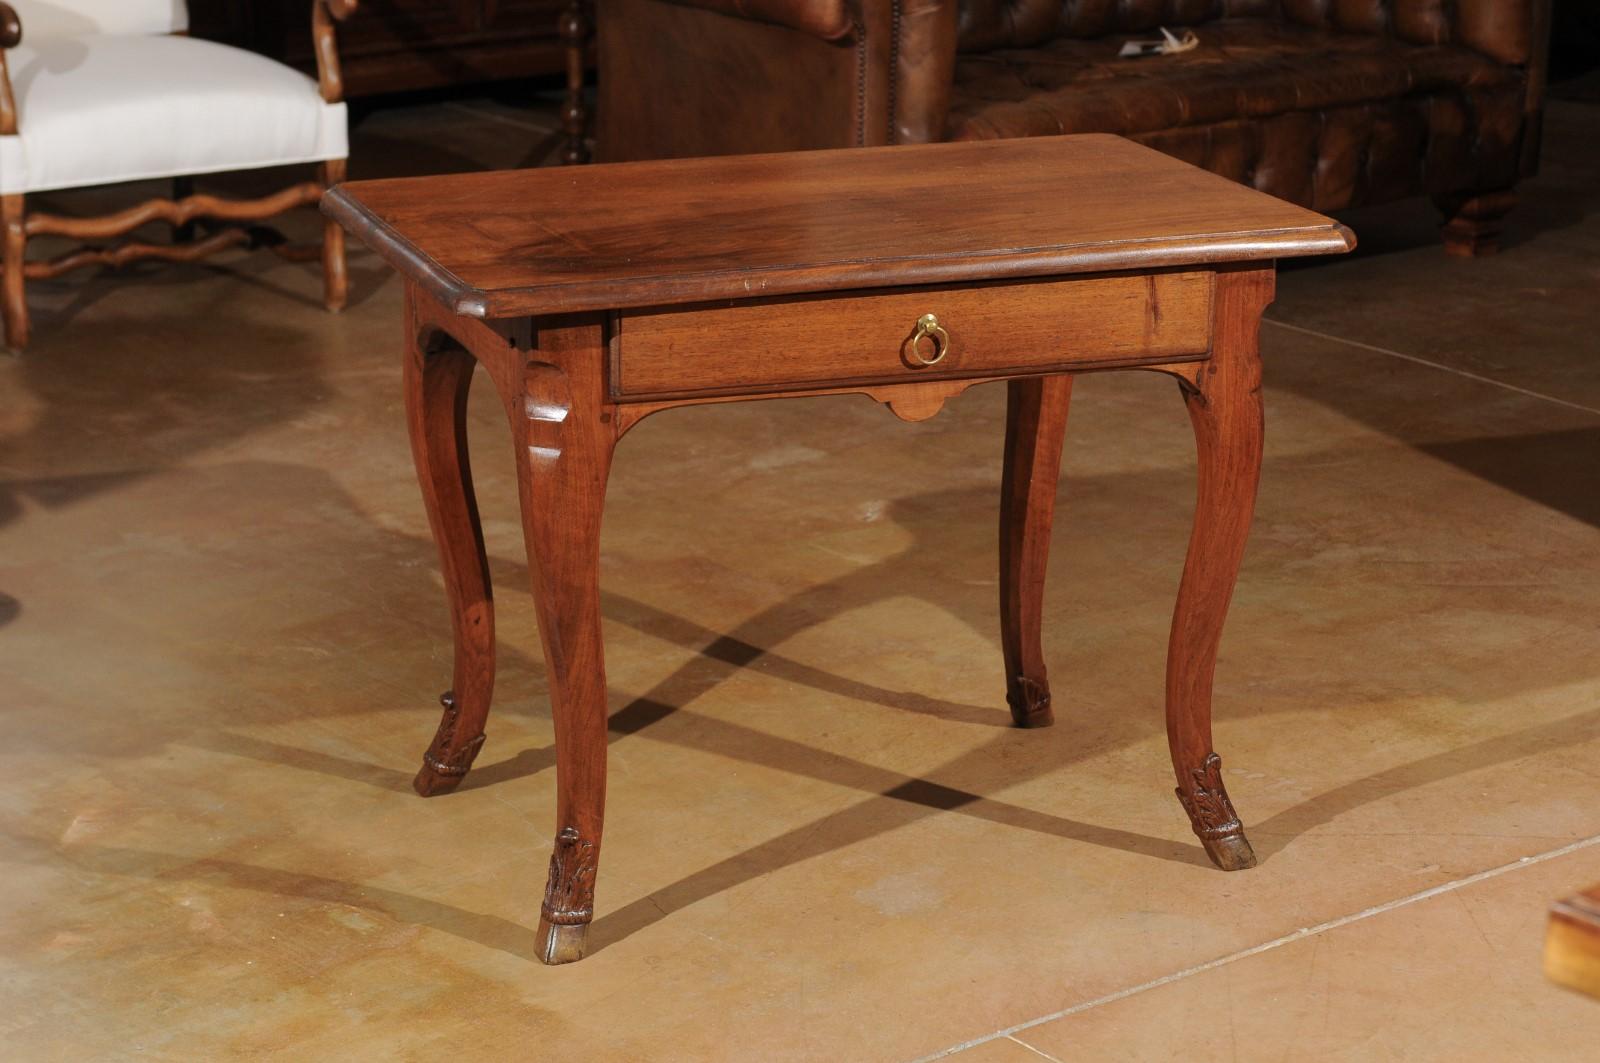 A French Louis XV style walnut side table from the mid-19th century with single drawer and hoofed feet. Born during the reign of France's last Emperor Napoleon III, this French walnut side table features a rectangular top with molded edges and